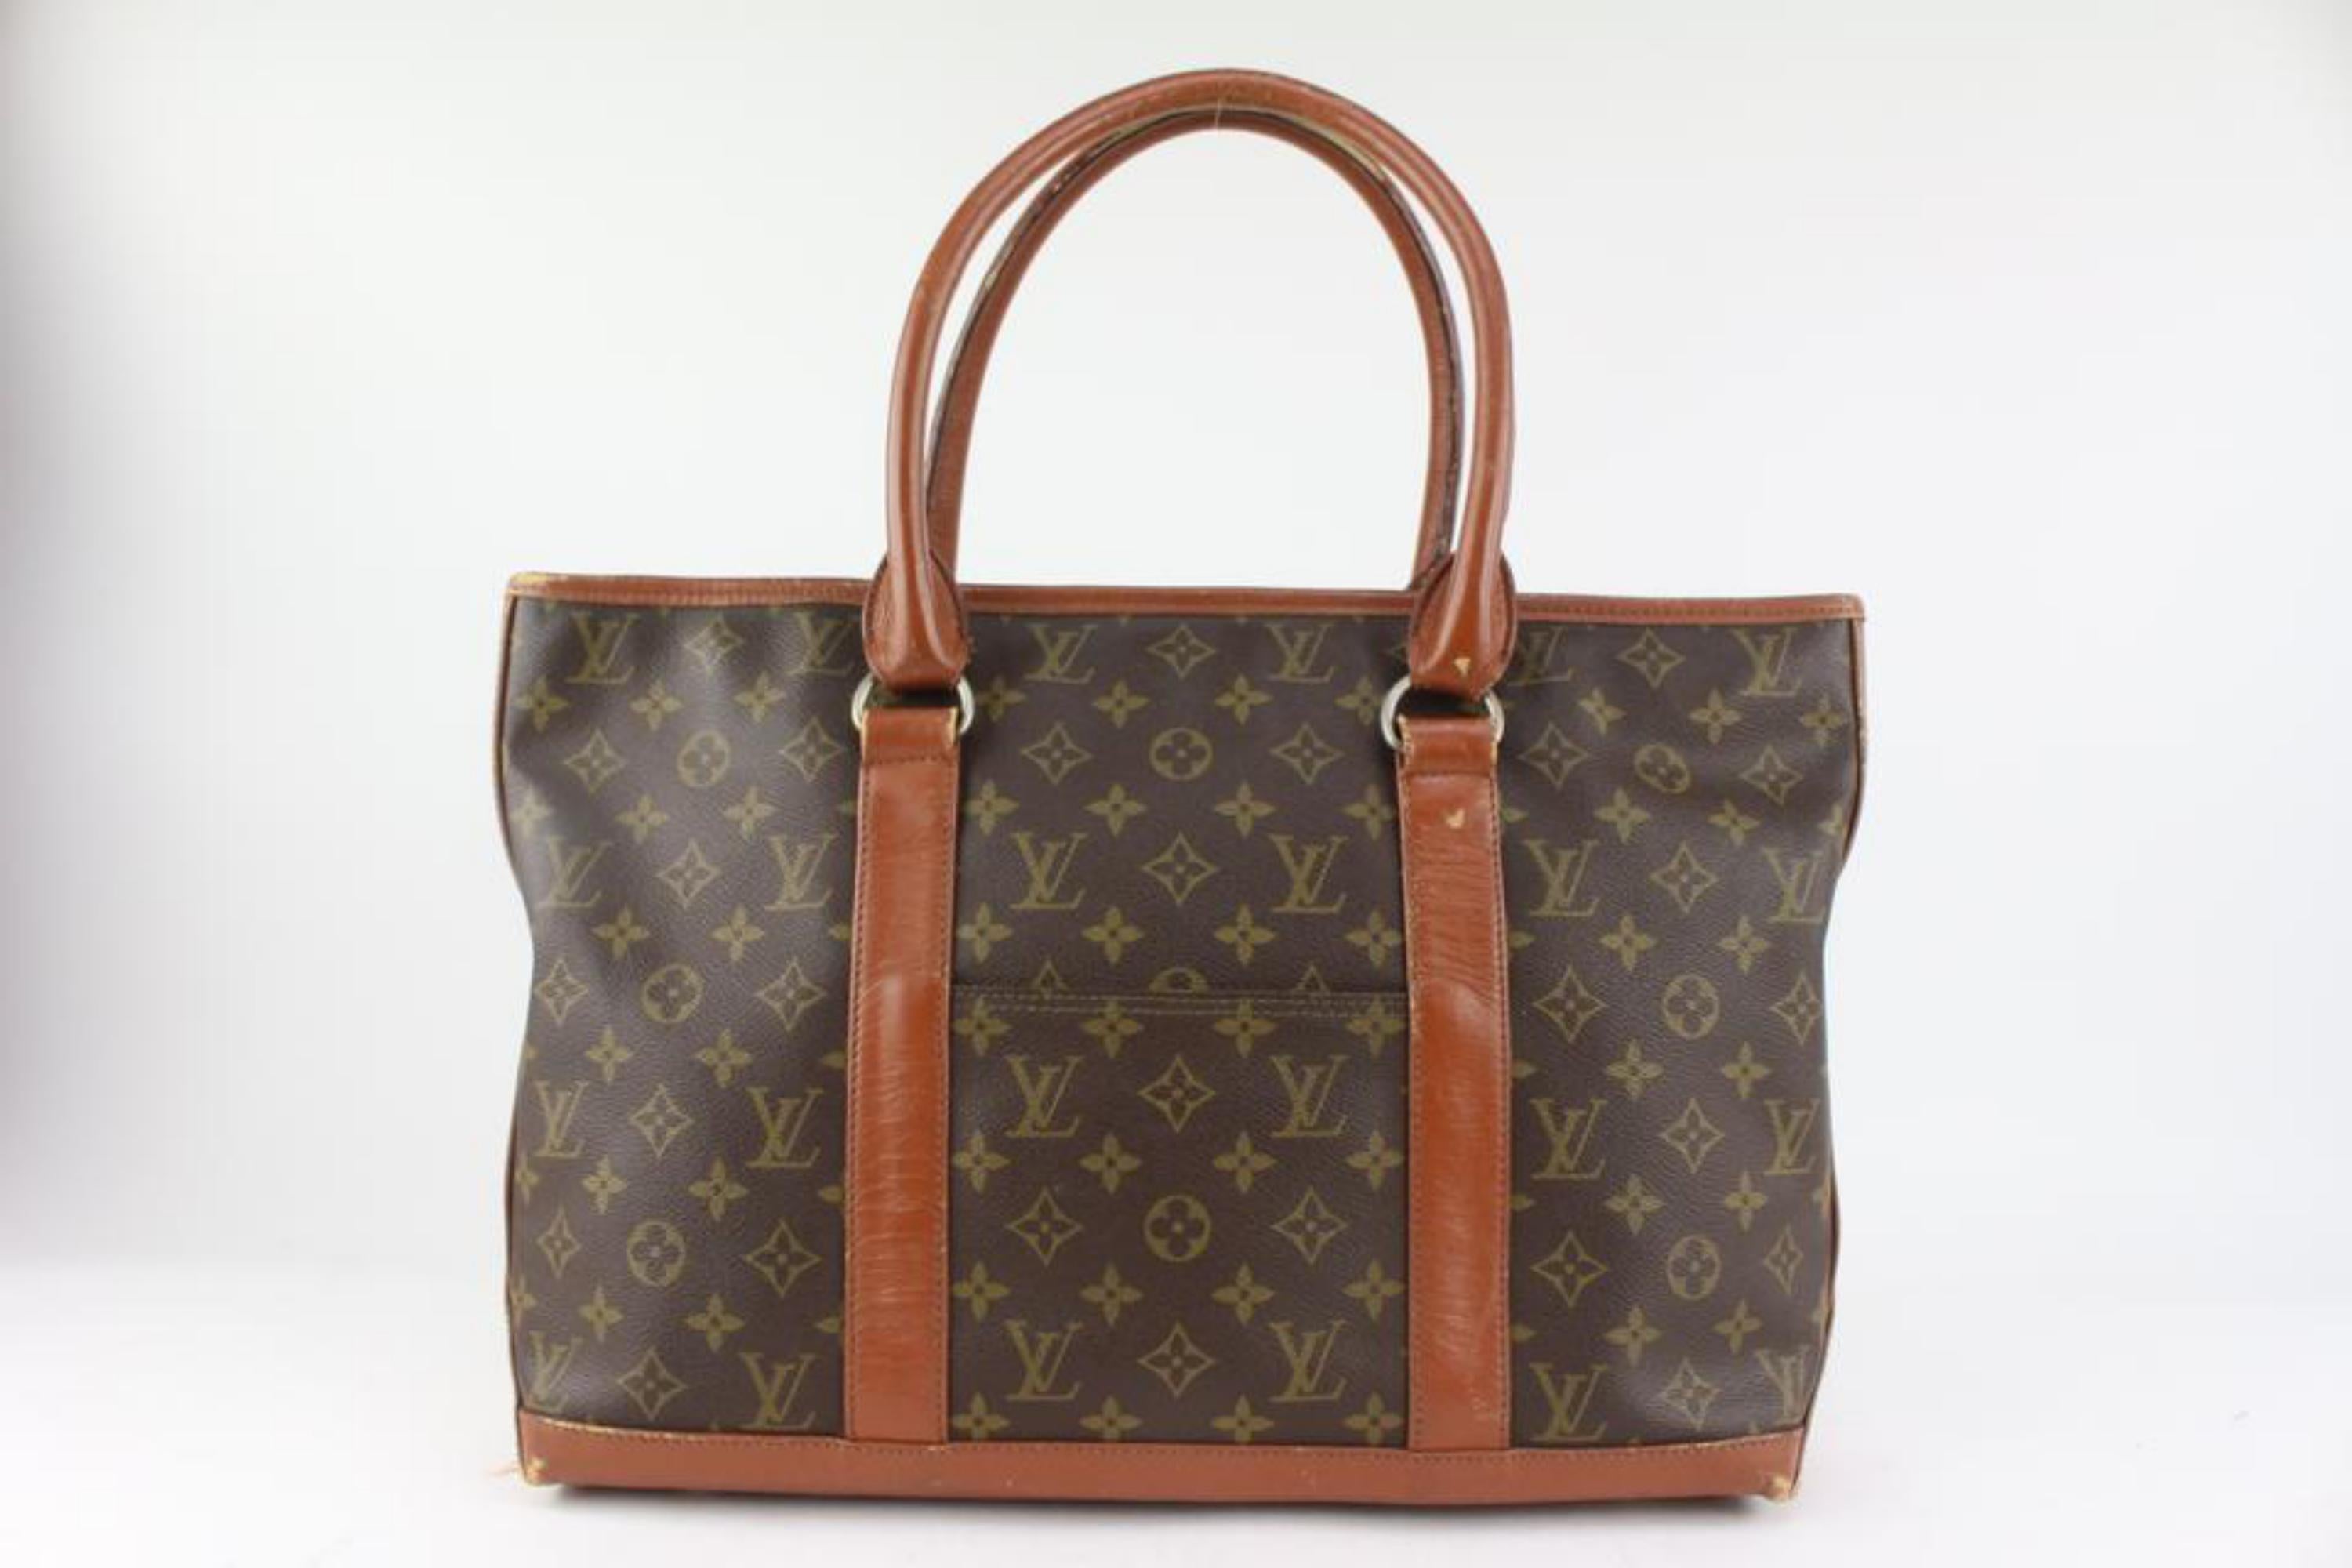 Louis Vuitton Monogram Sac Weekend PM Zip Tote bag 1119lv50 In Fair Condition For Sale In Dix hills, NY